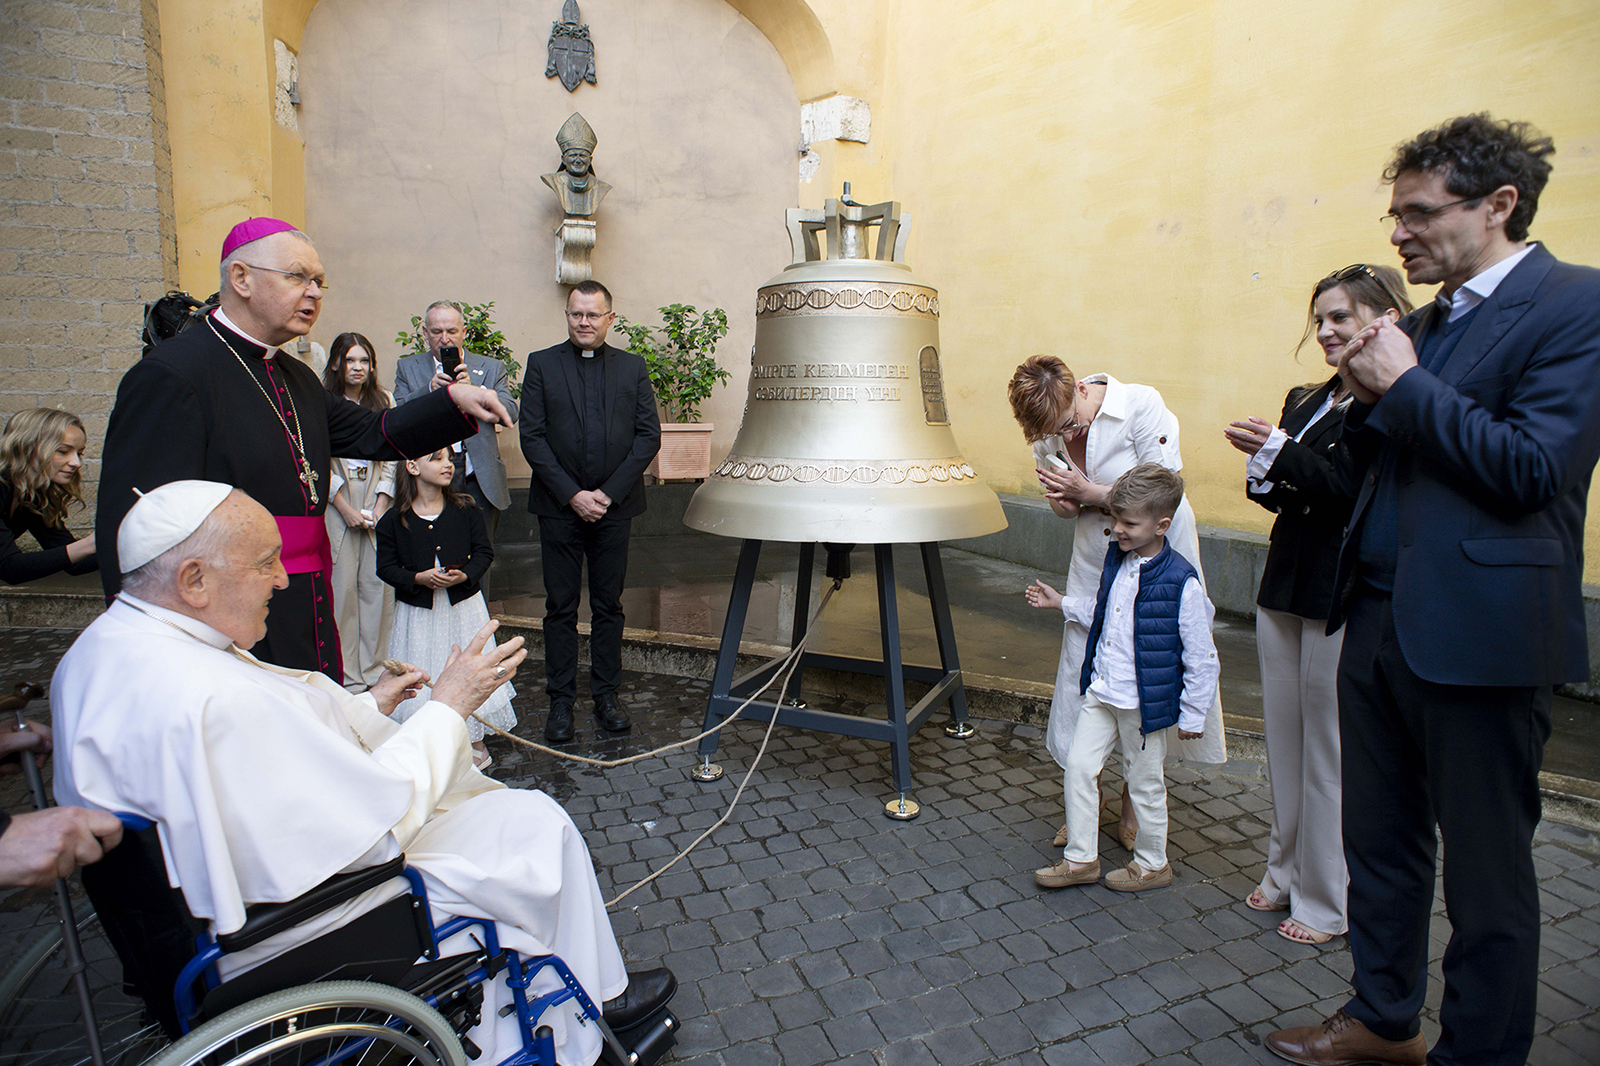 Pope Francis prepared to ring a bell called “The Voice of the Unborn” before his general audience at the Vatican May 15. The bell was made for a parish in Kazakhstan by the Yes to Life Foundation, a pro-life group in Poland.